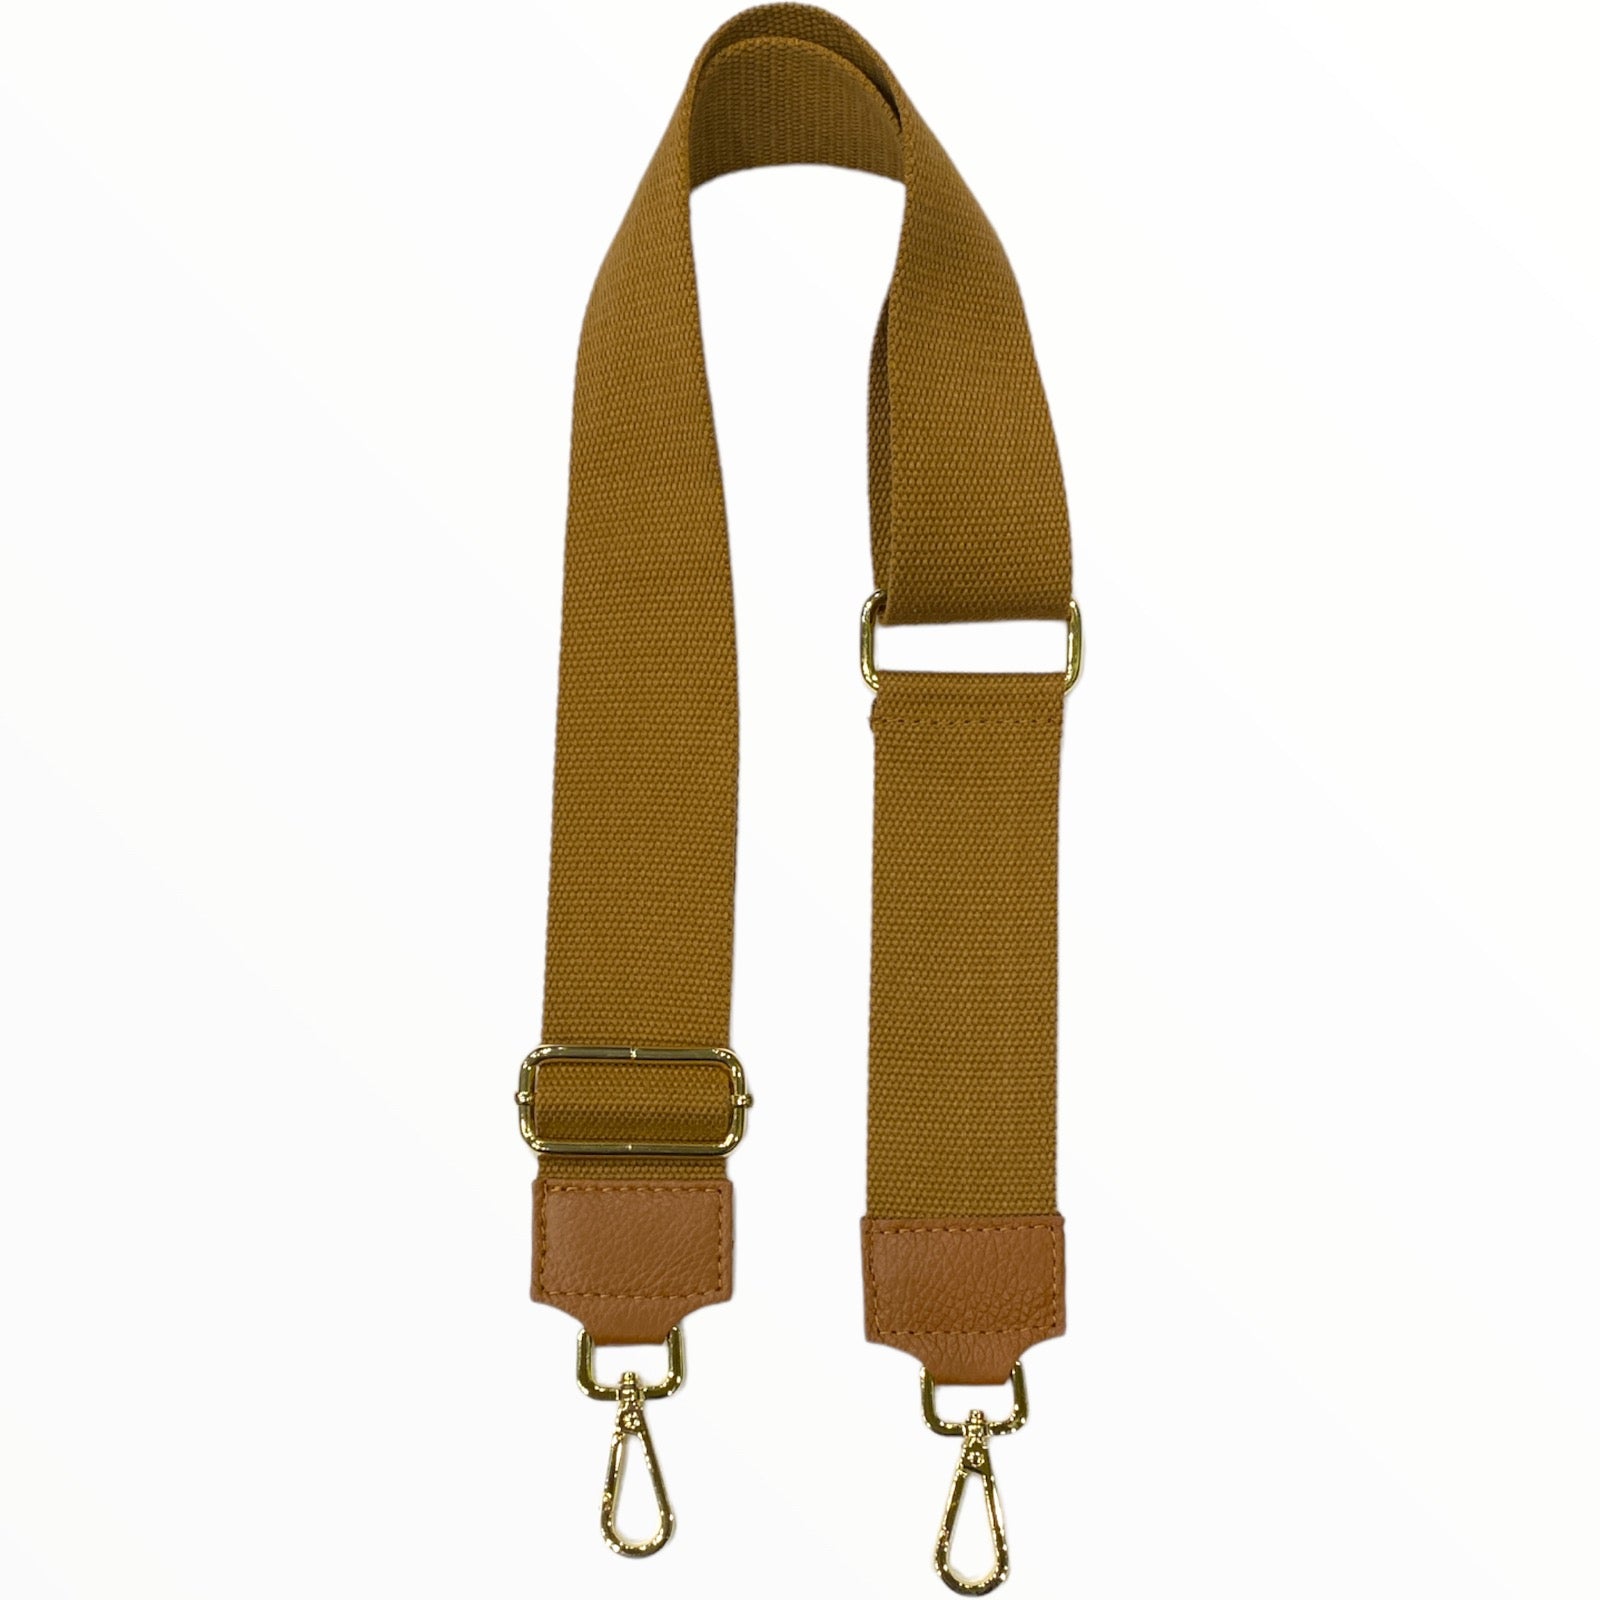 Camel adjustable strap with gold metals